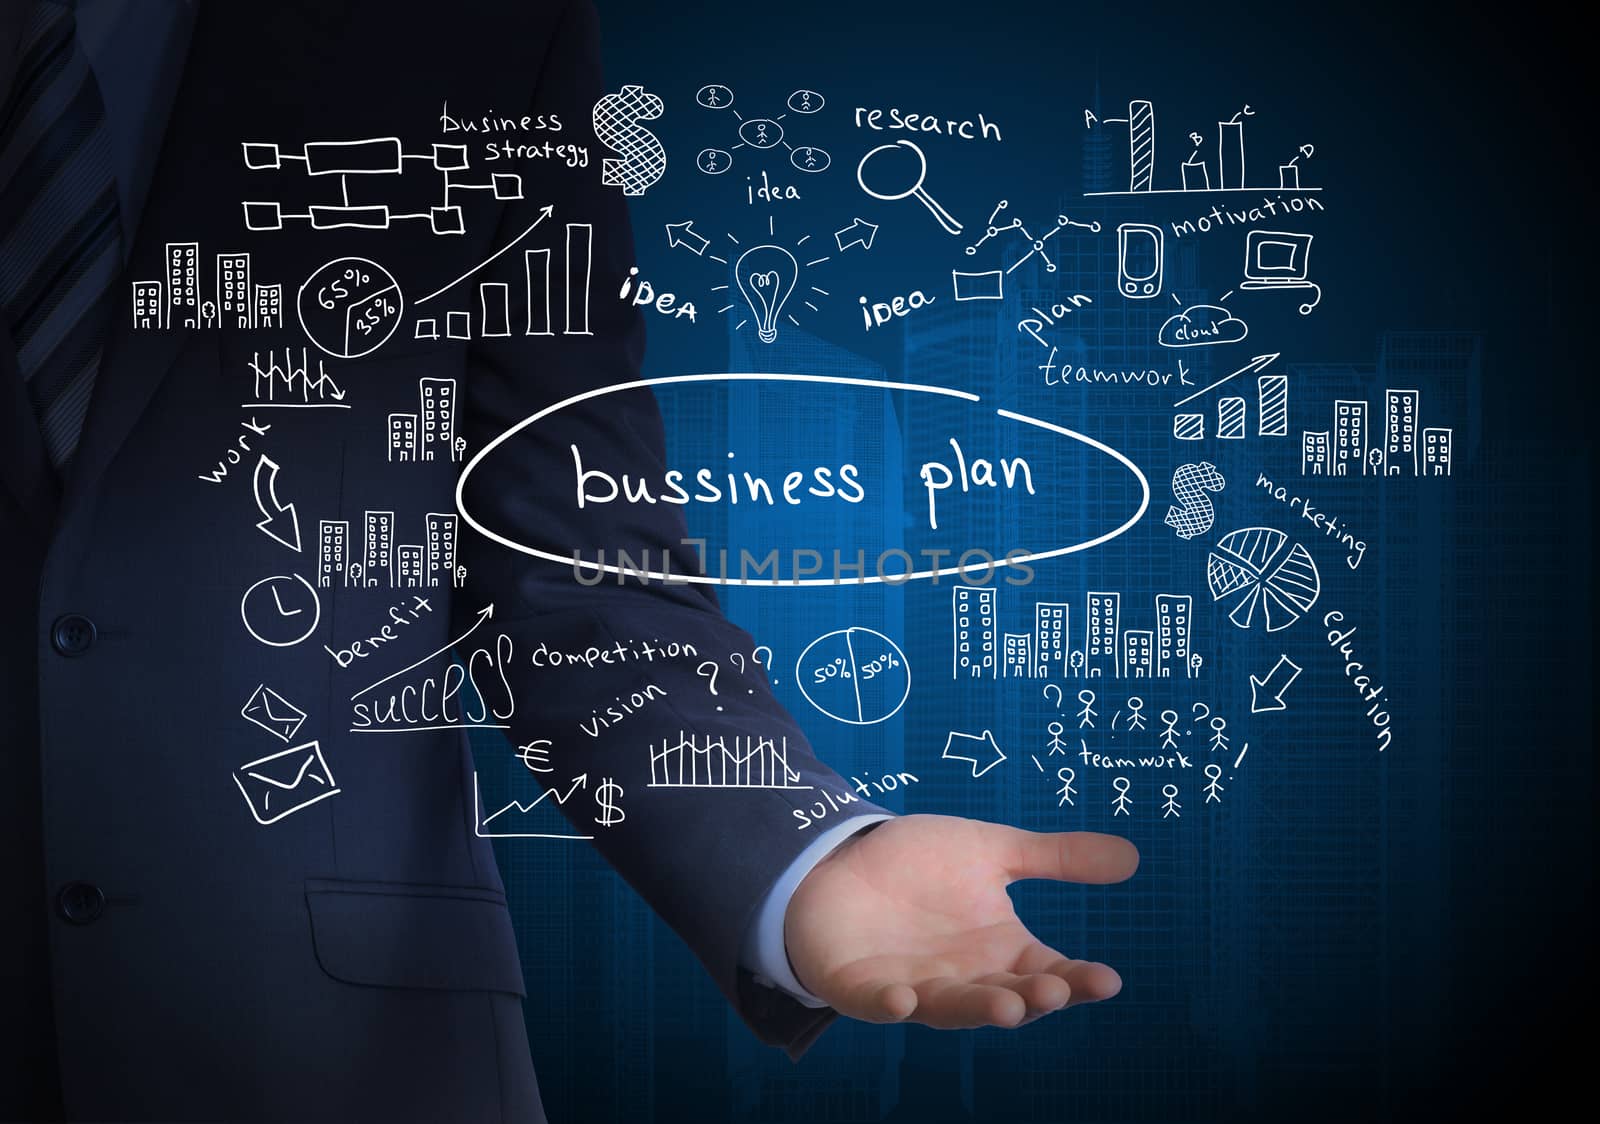 Man in suit holding business plan. Around fly business sketches